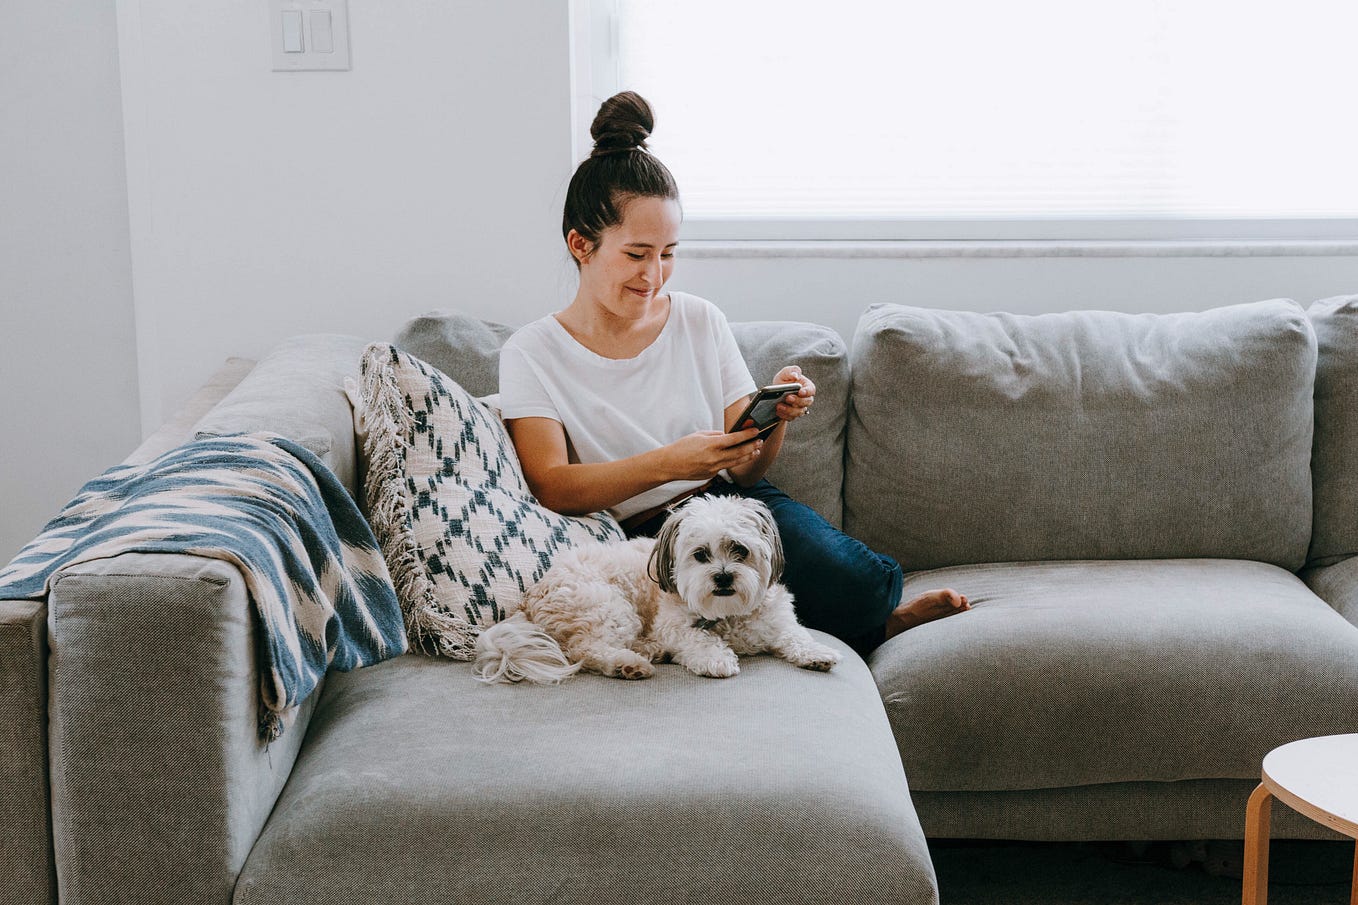 Millennial woman on phone with dog at home.